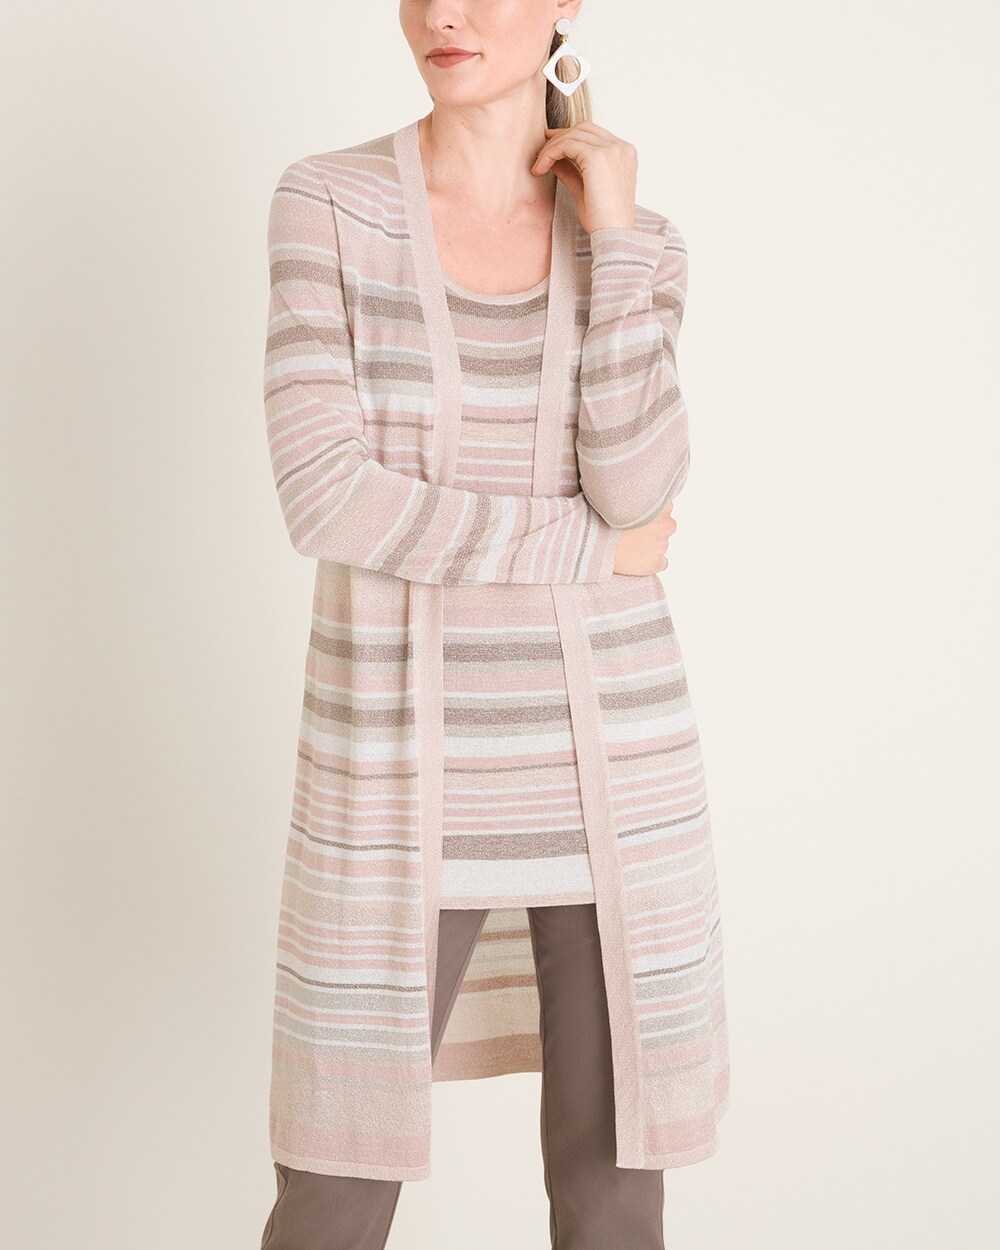 Travelers Collection Striped Cardigan